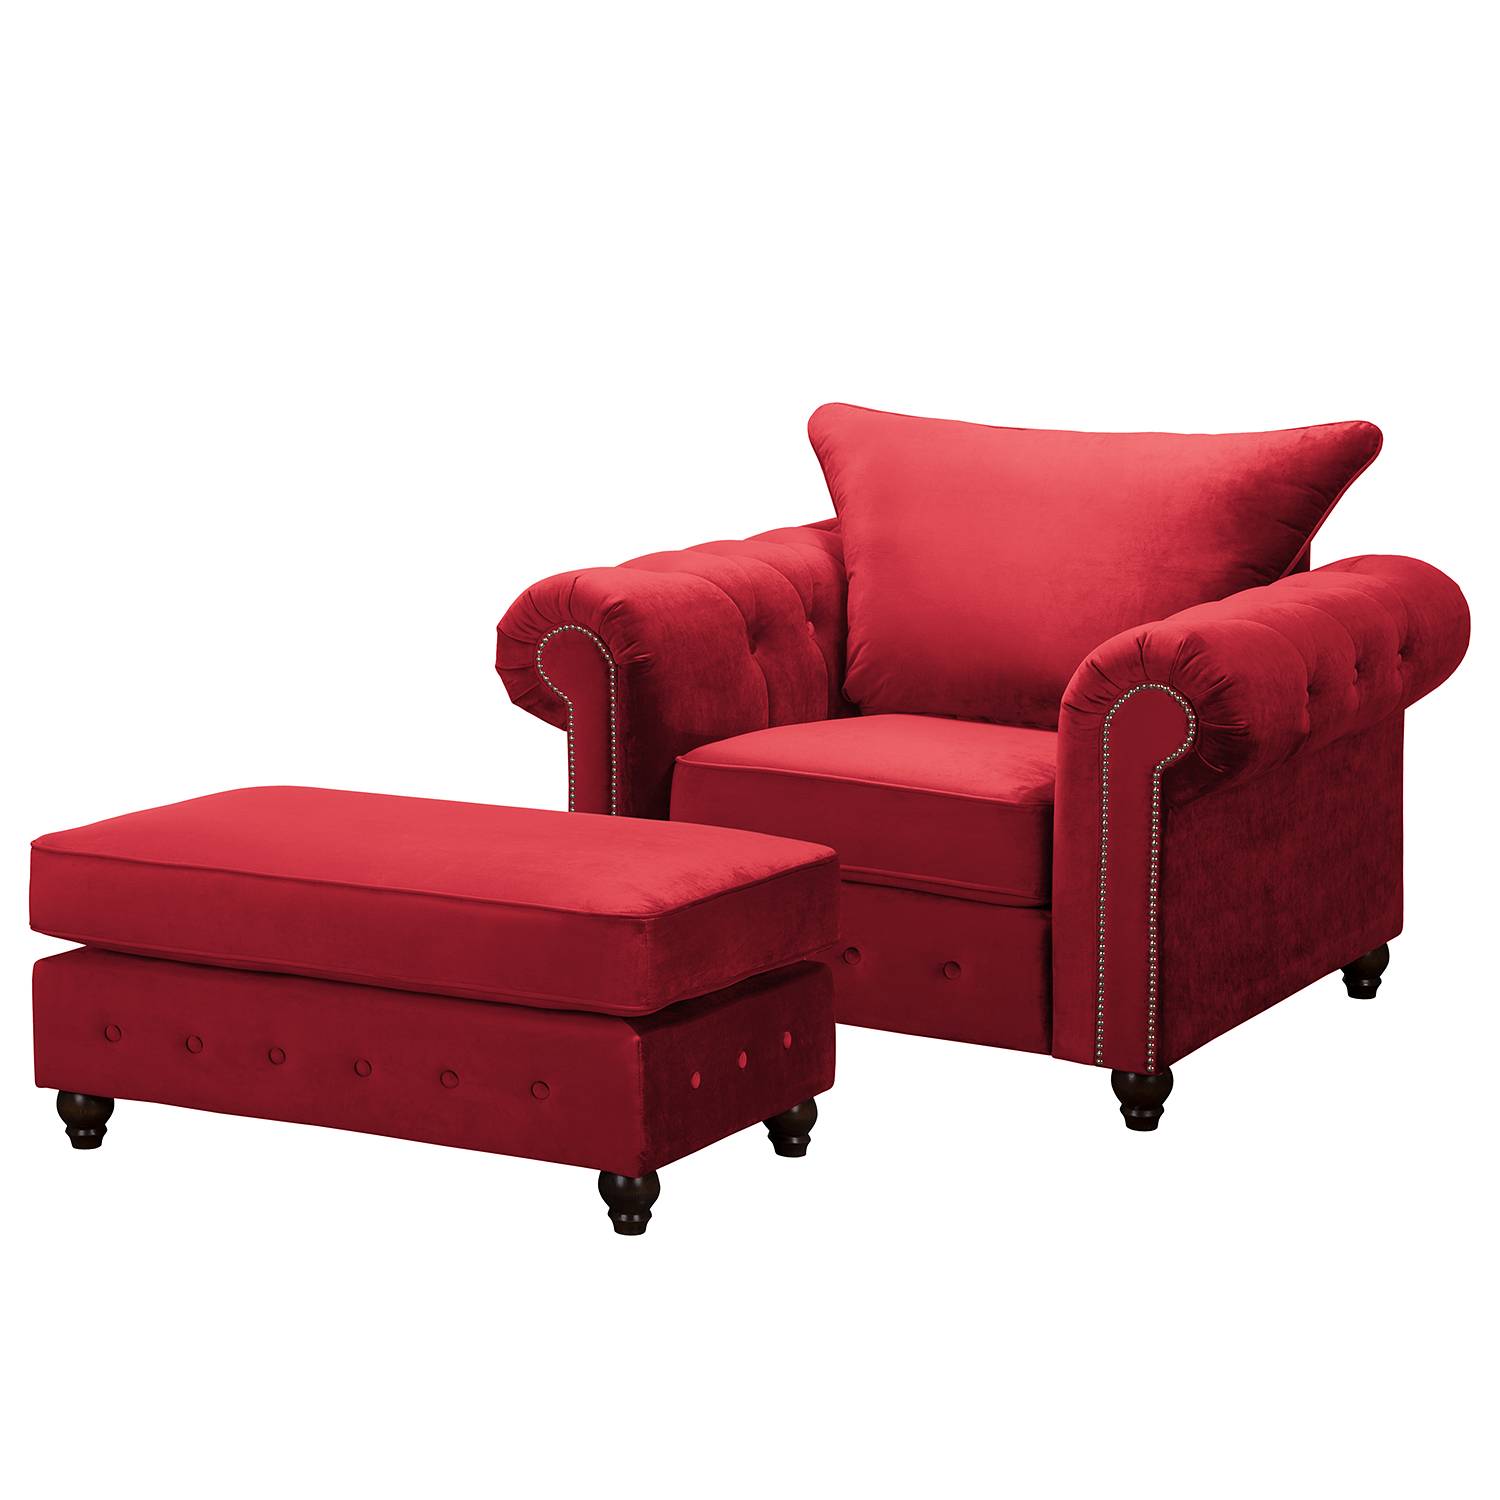 Image of Fauteuil Solita 000000001000135714